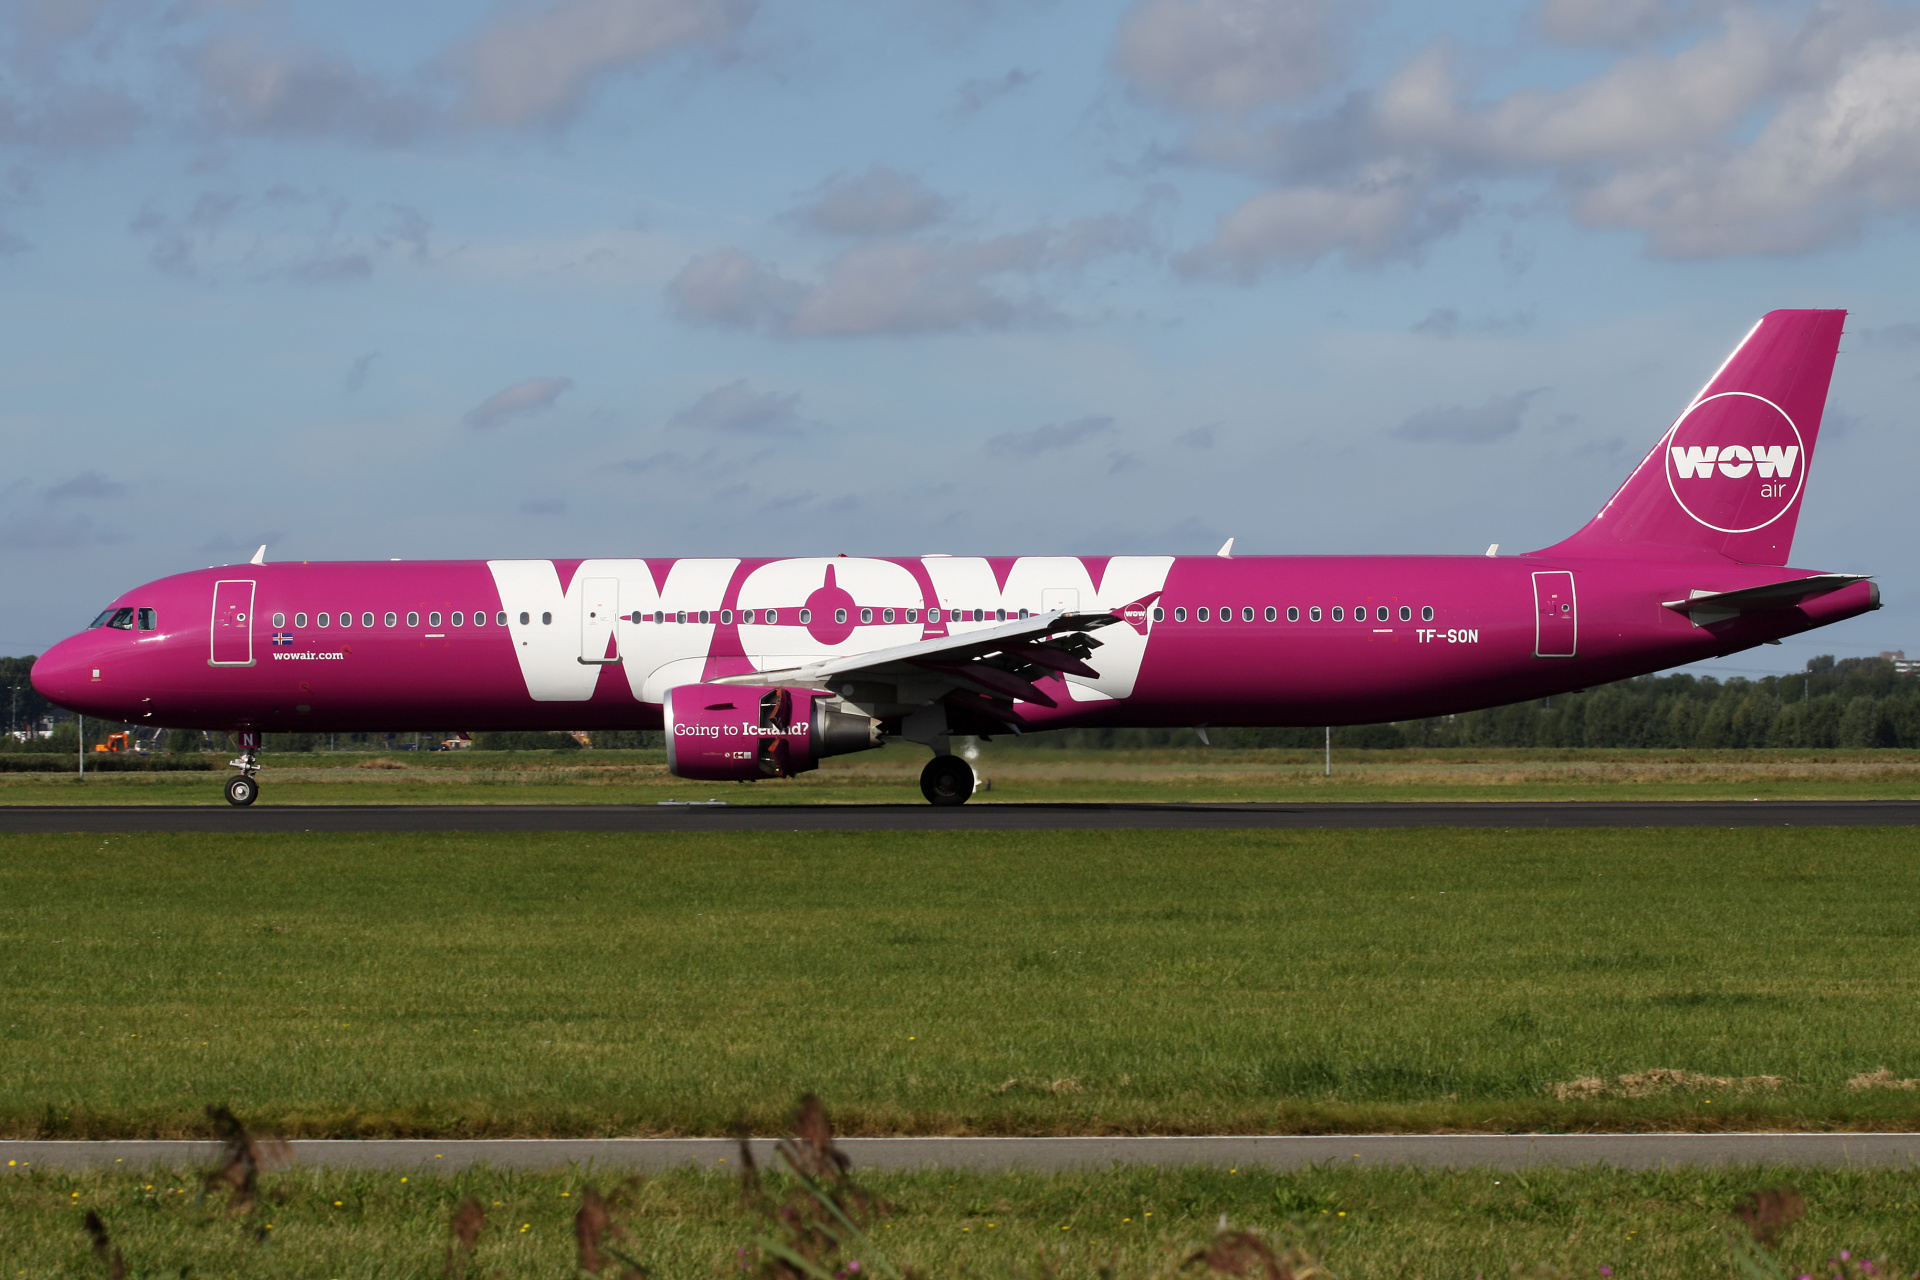 TF-SON, WOW air (Aircraft » Schiphol Spotting » Airbus A321-200)